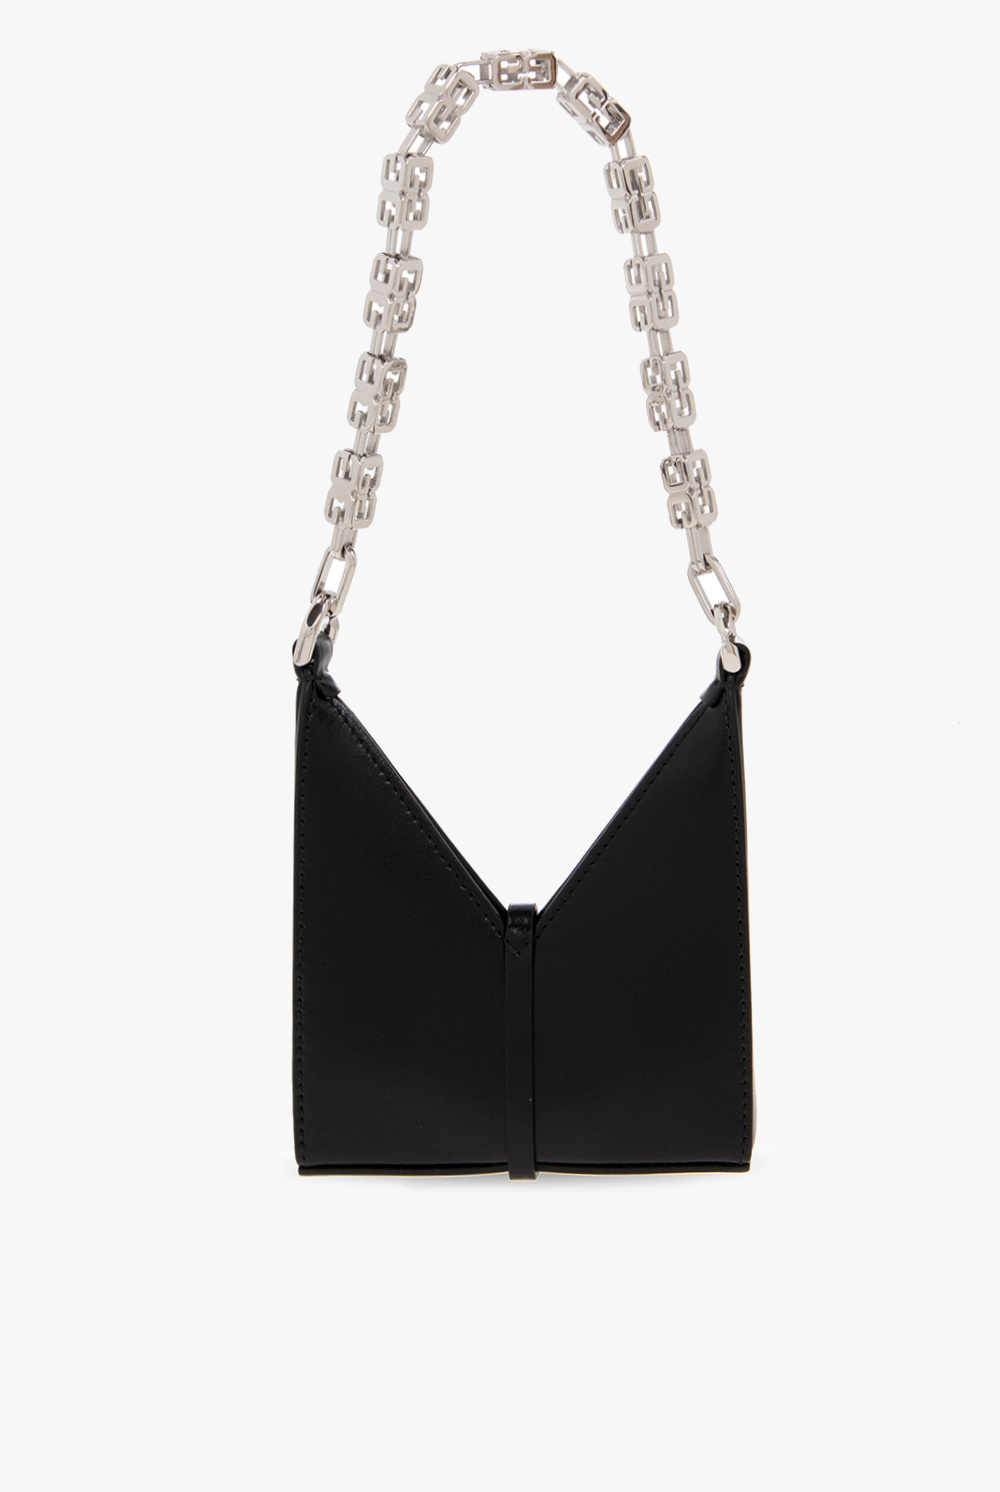 givenchy Collaboration ‘Cut Out Micro’ shoulder bag